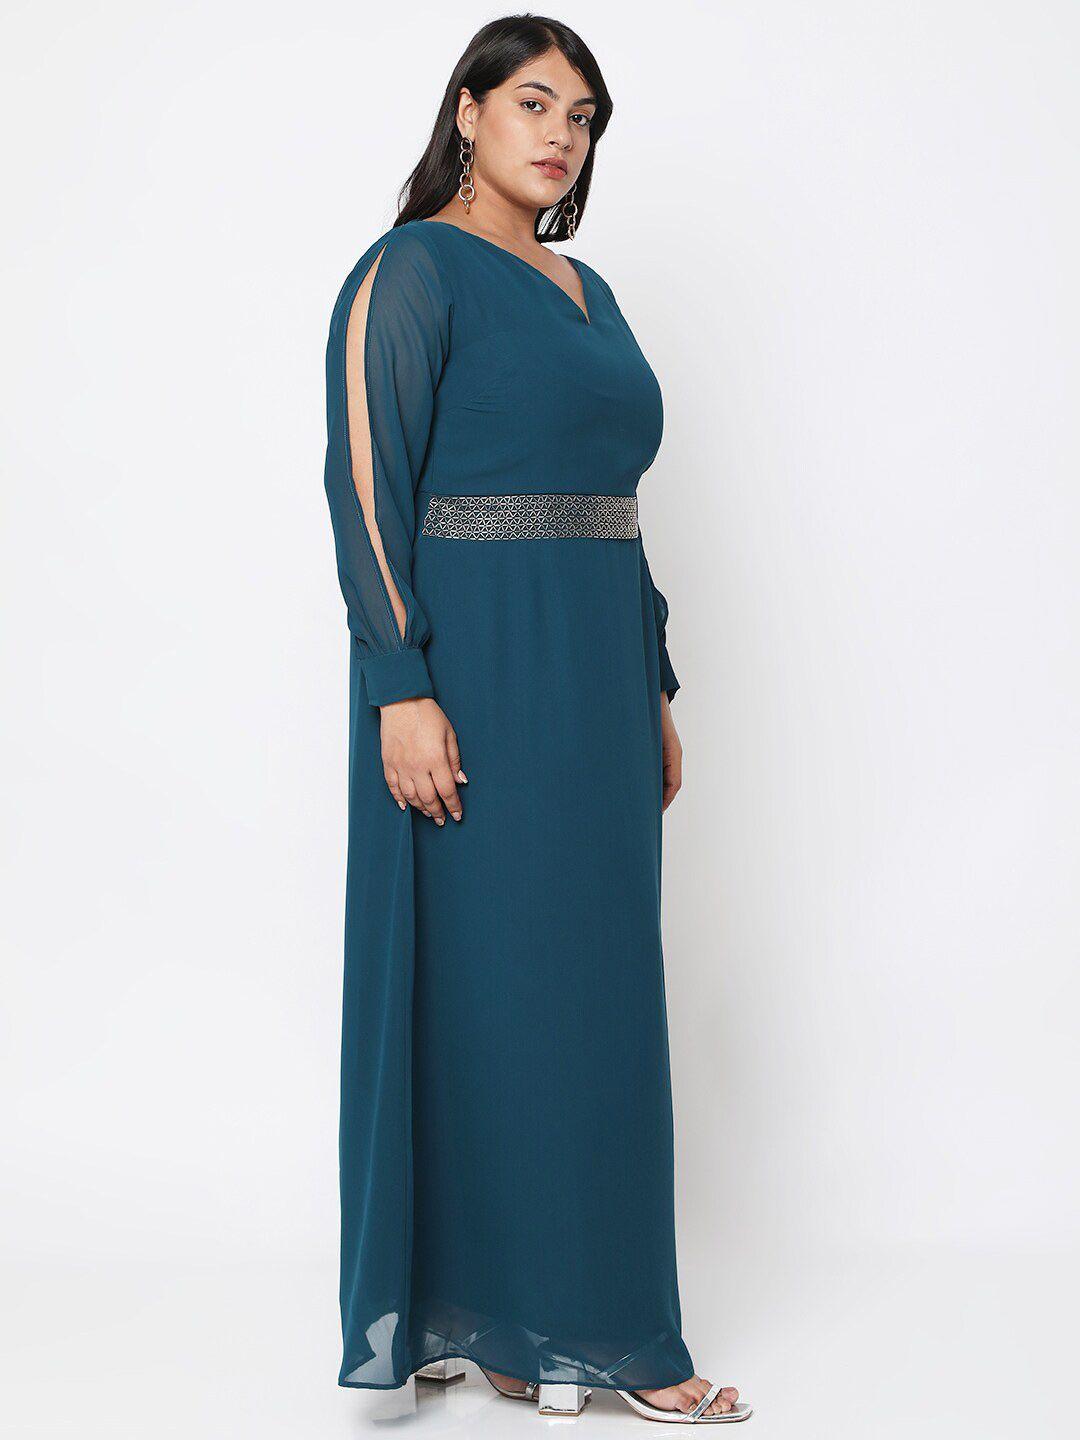 curves-by-mish-teal-plus-size-georgette-maxi-dress